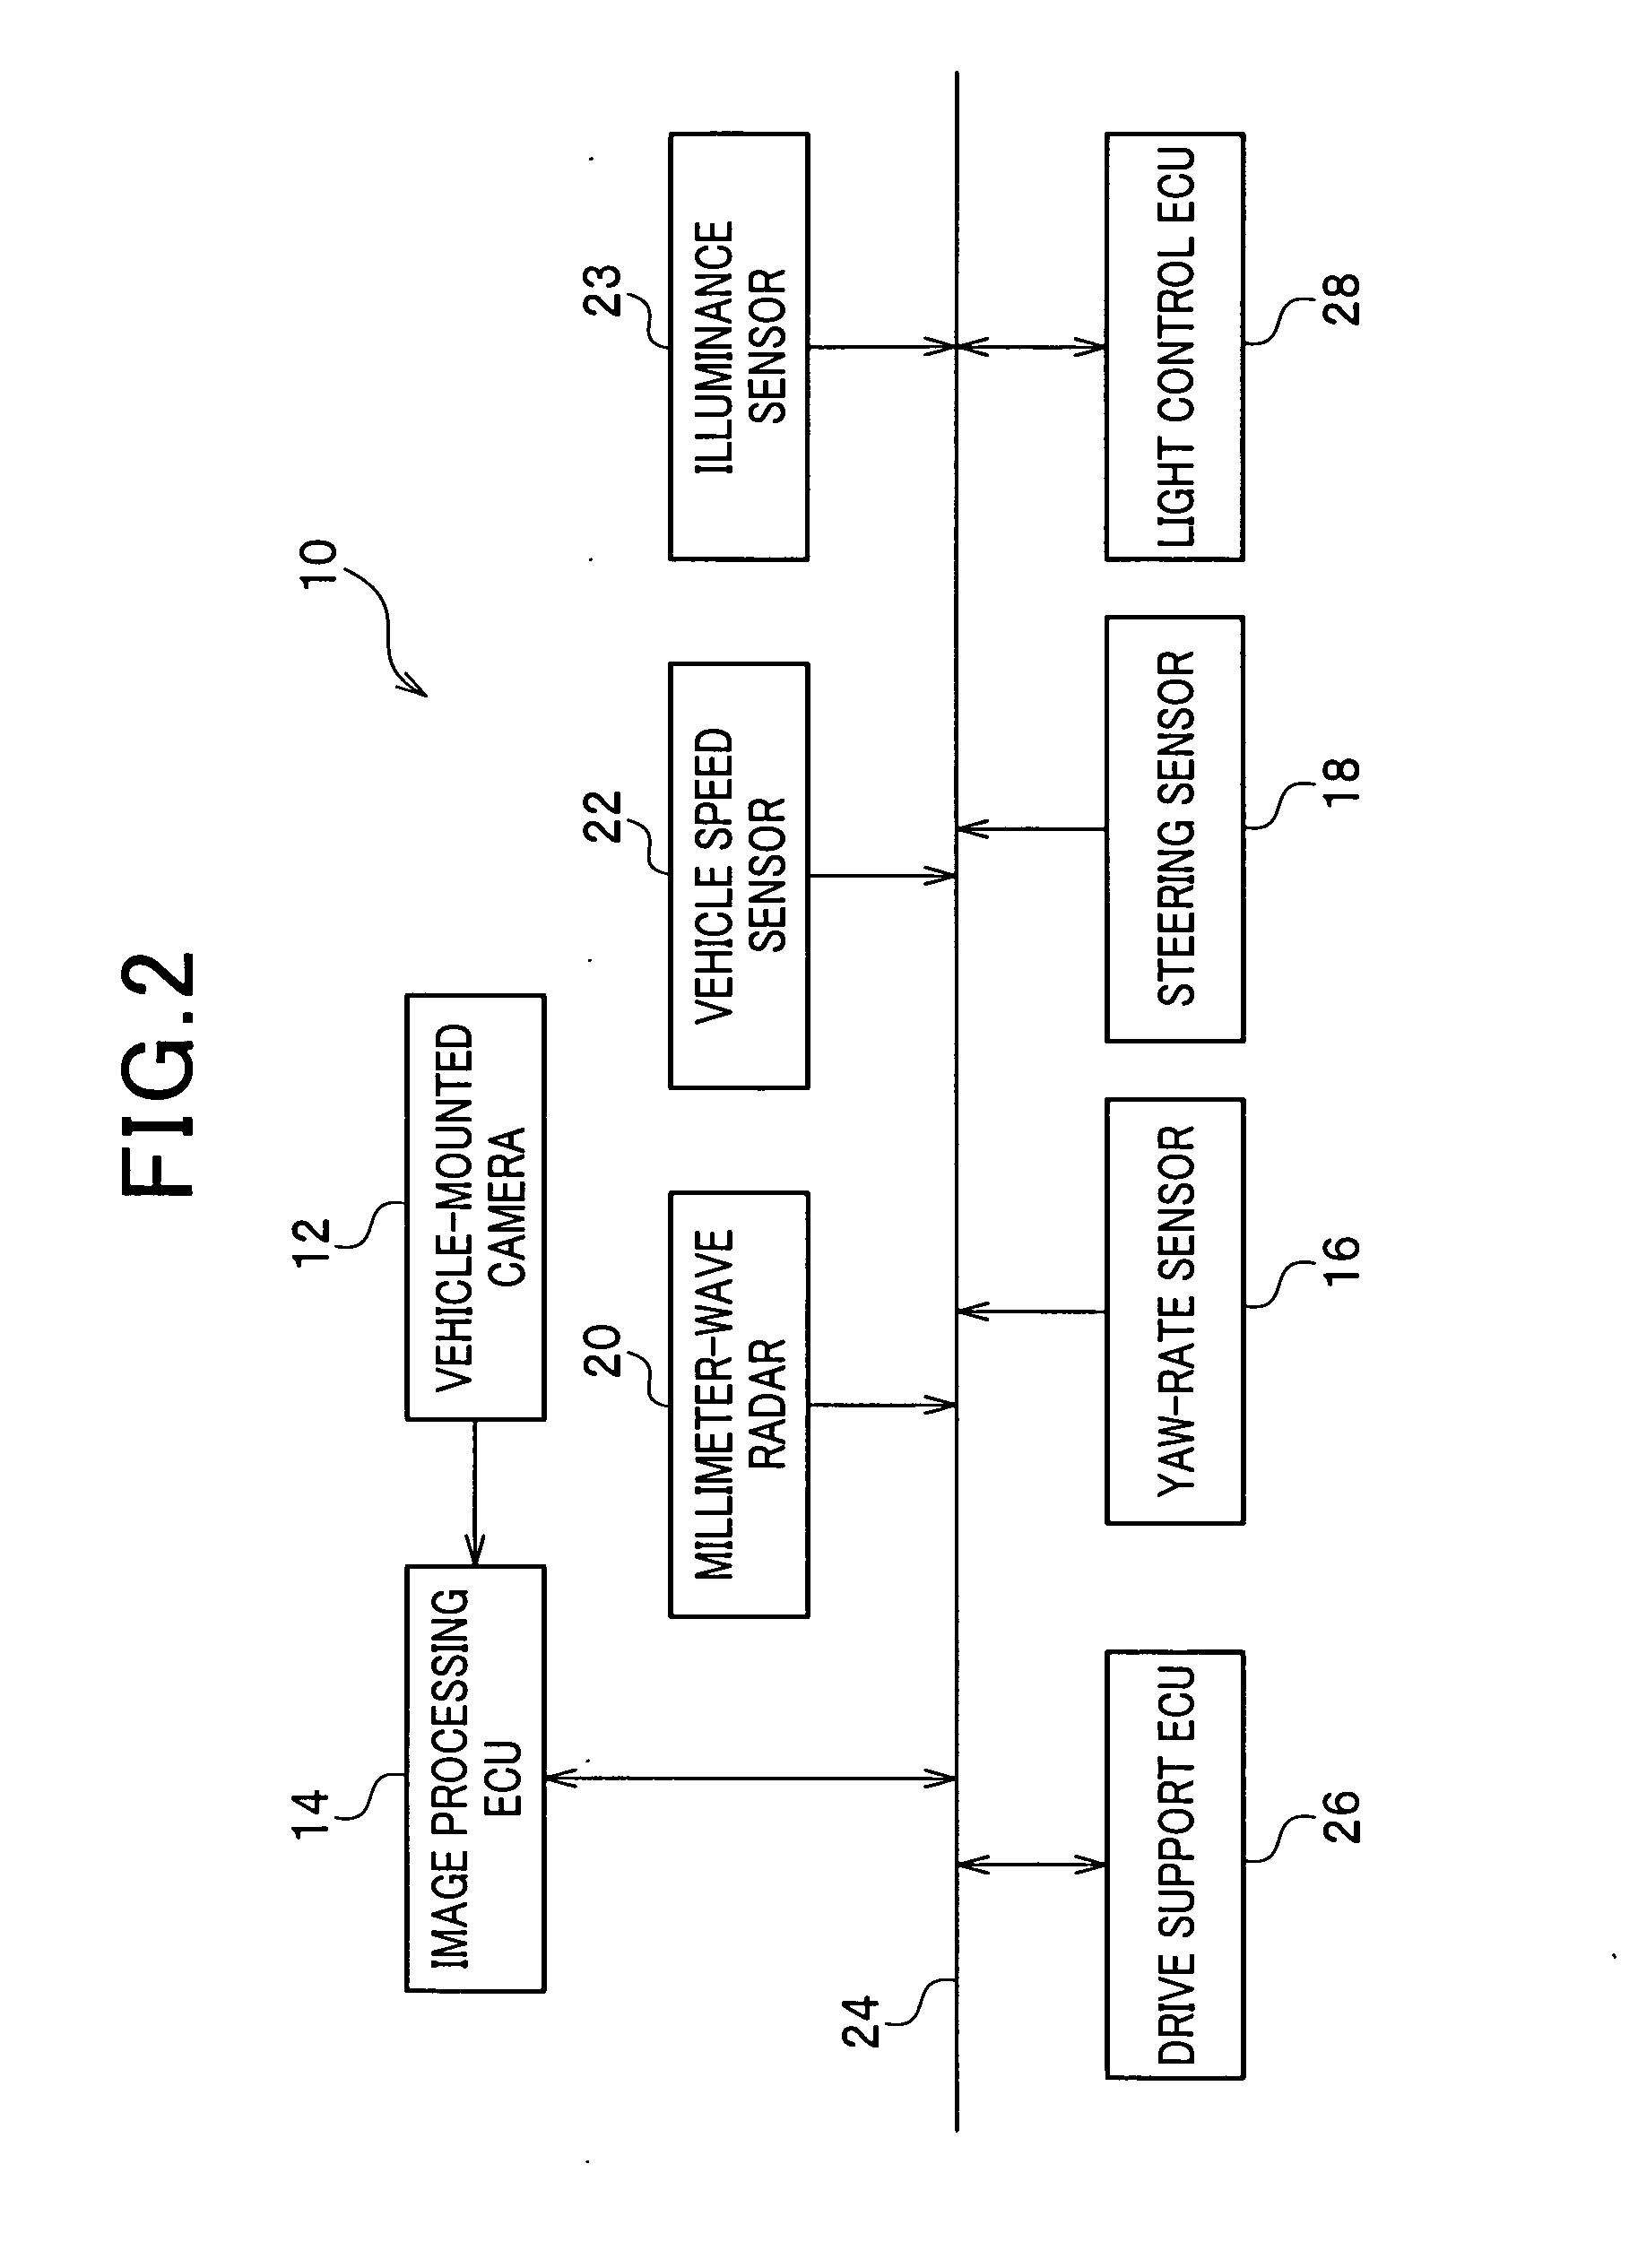 Apparatus for determining the presence of fog using image obtained by vehicle-mounted device